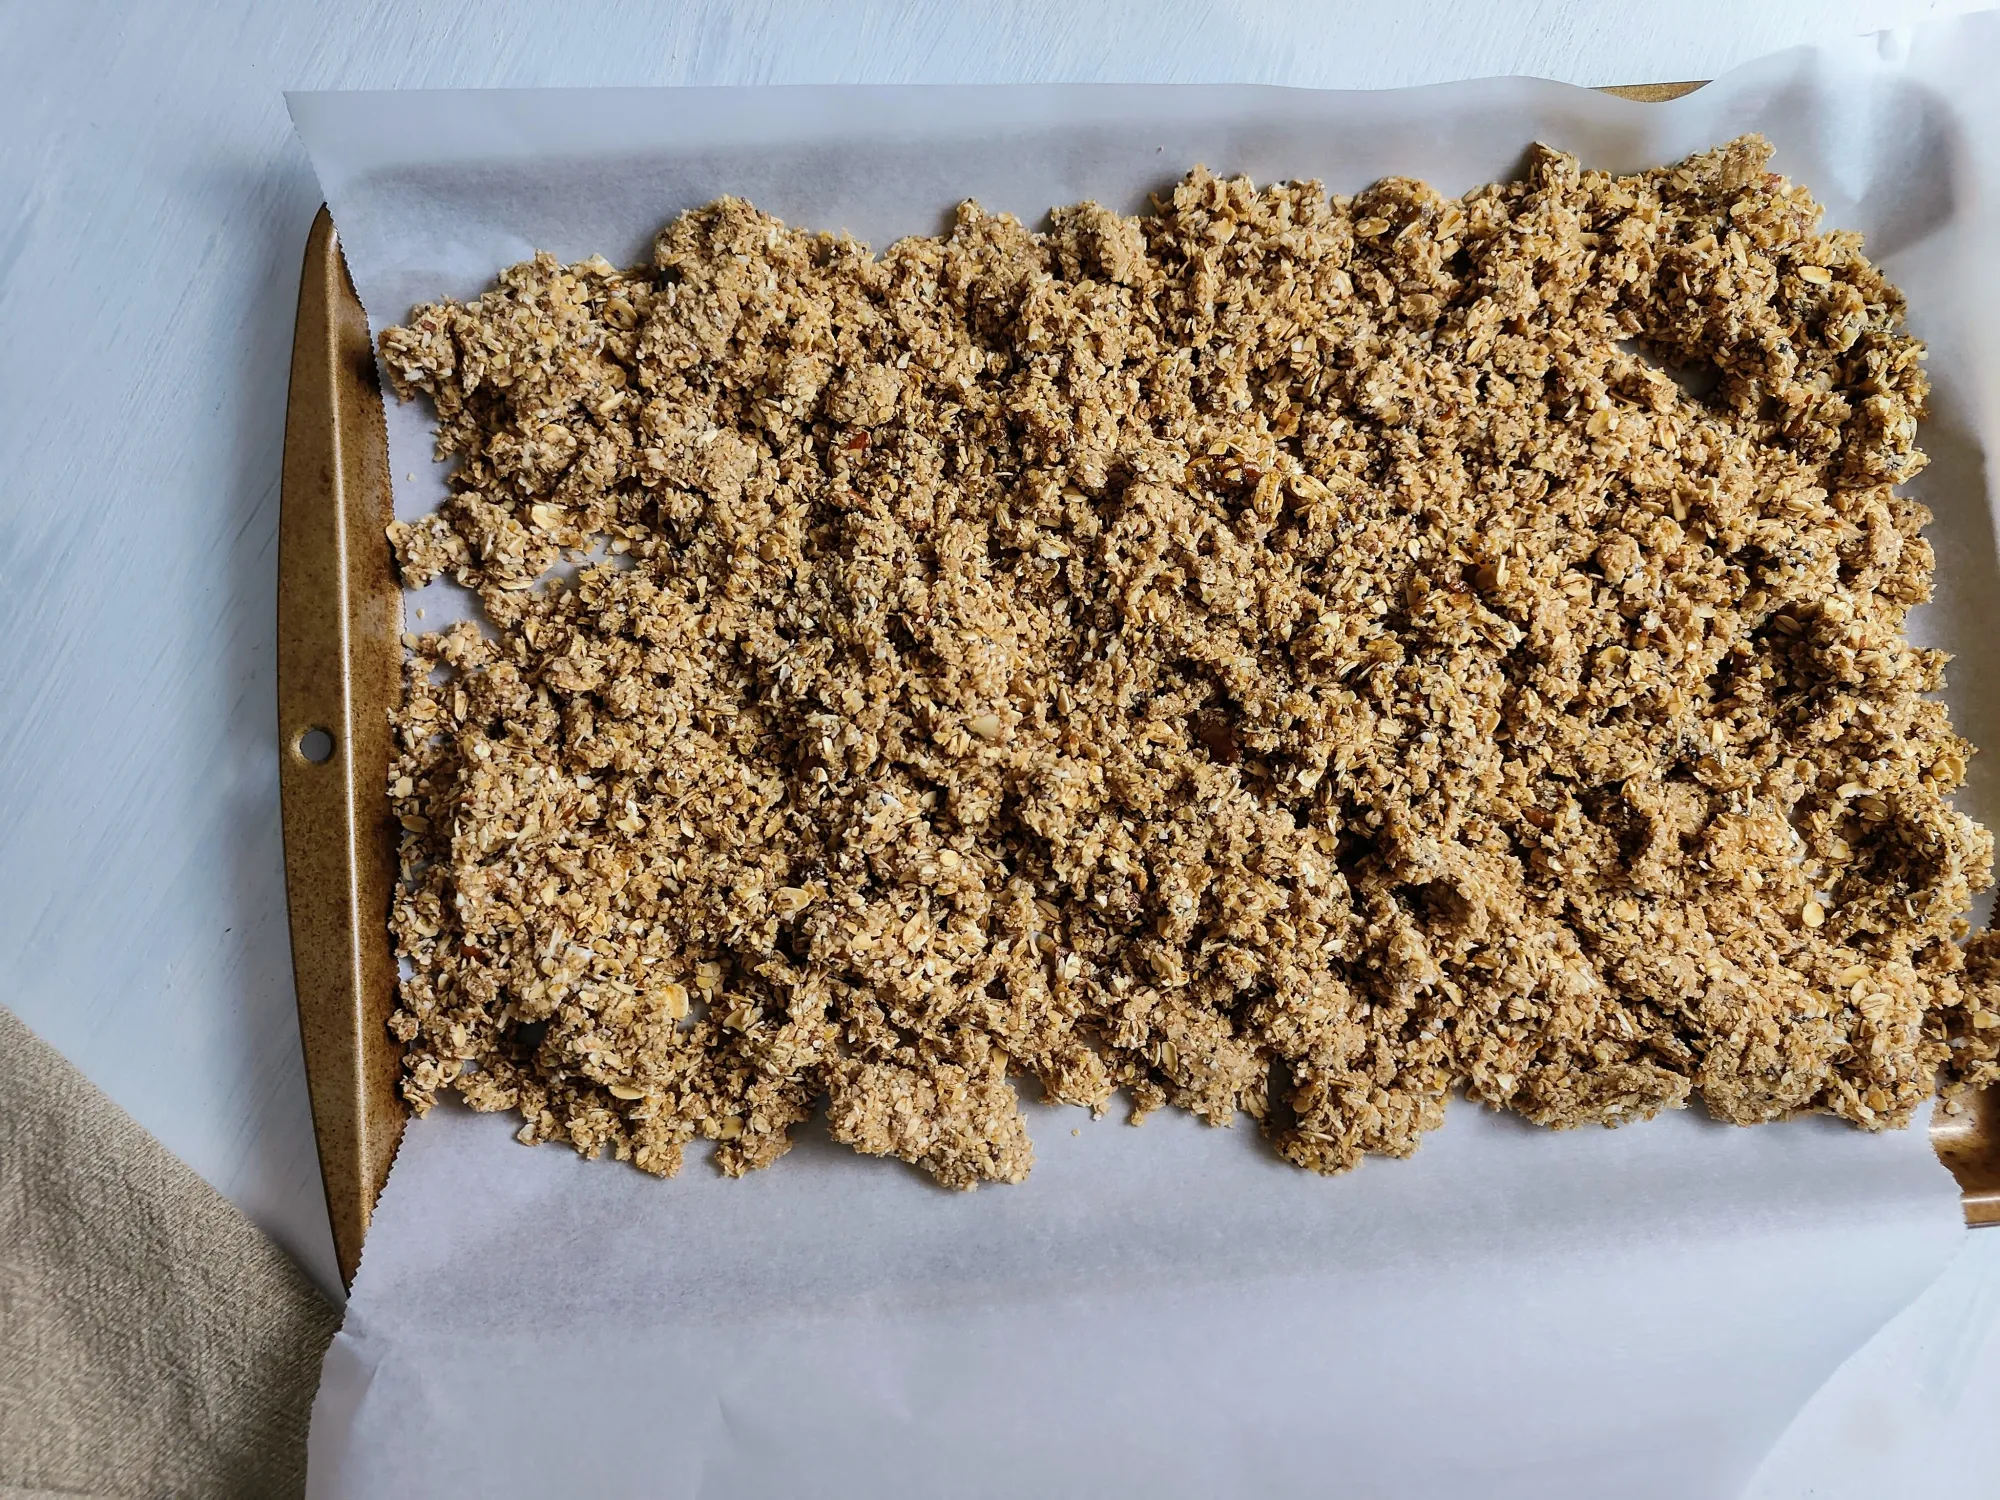 Granola spread out on a parchment sheet